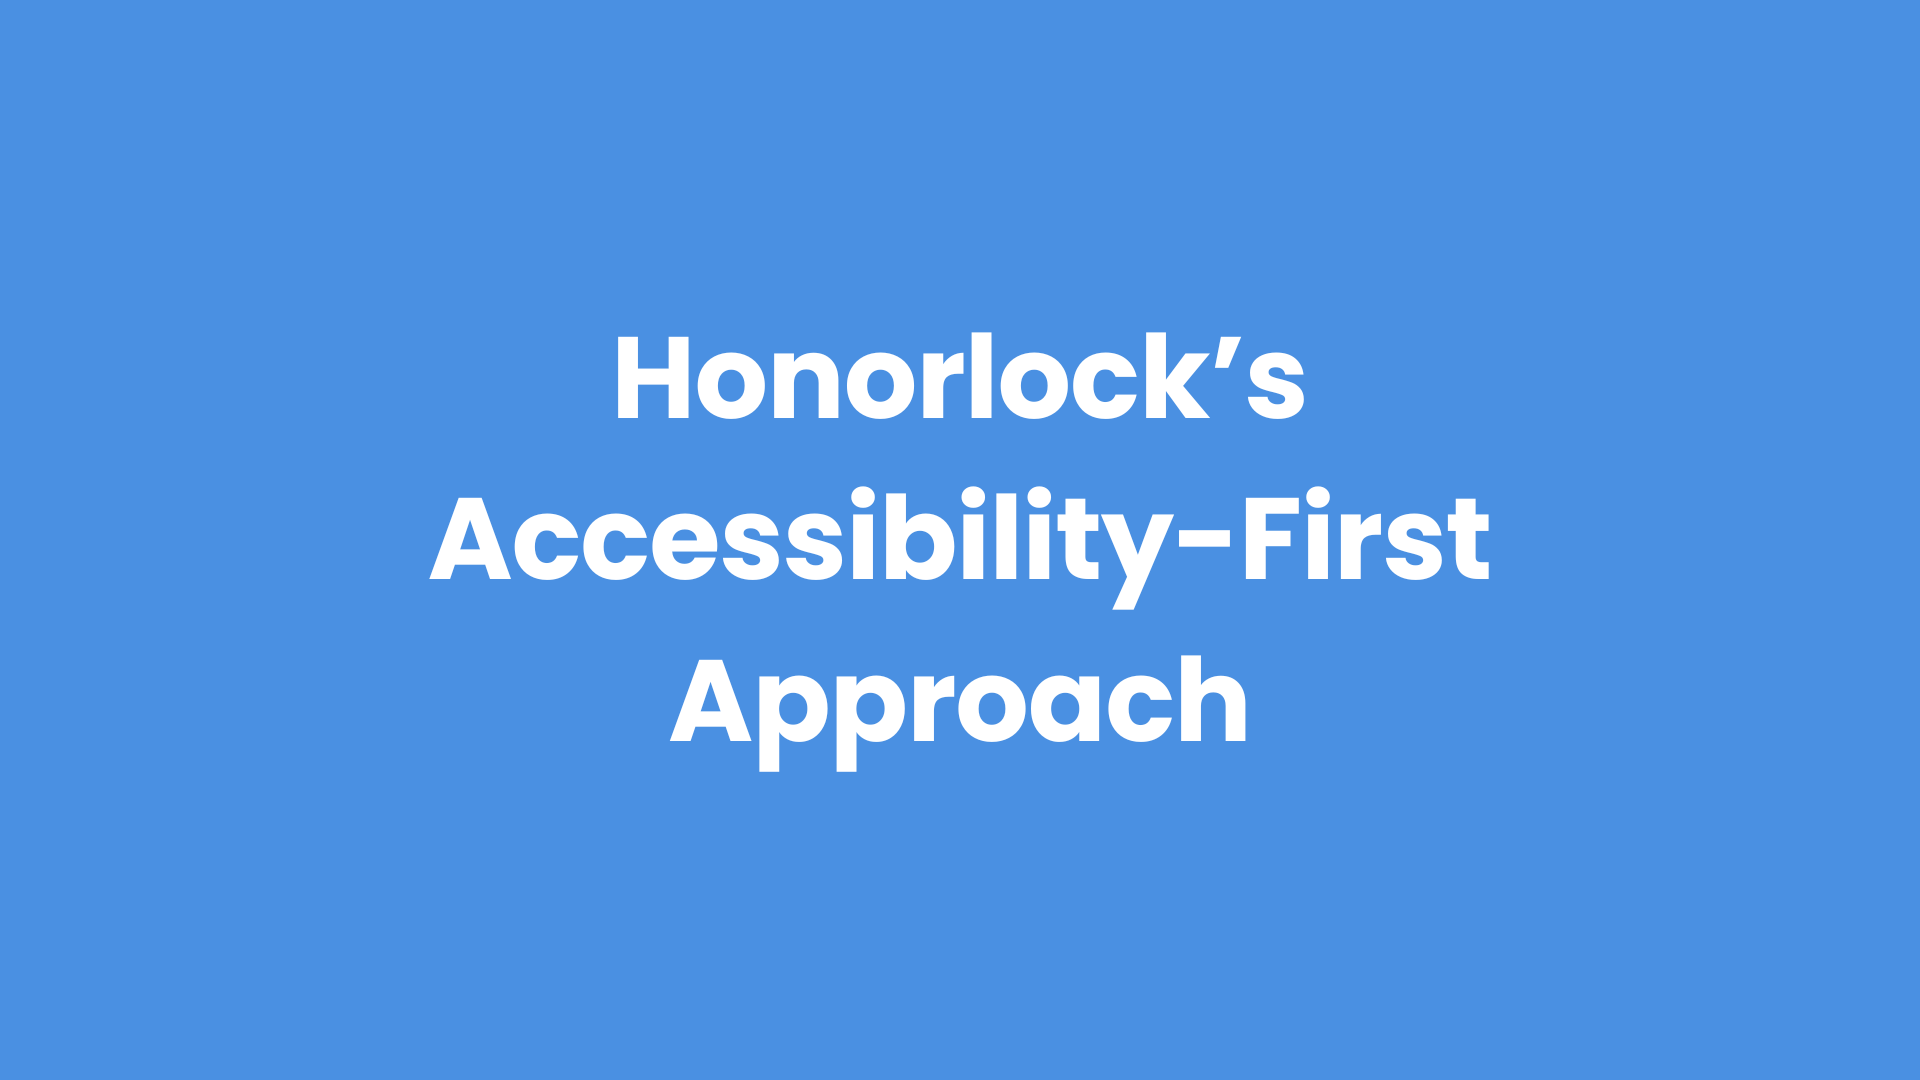 Honorlock's accessibility first approach